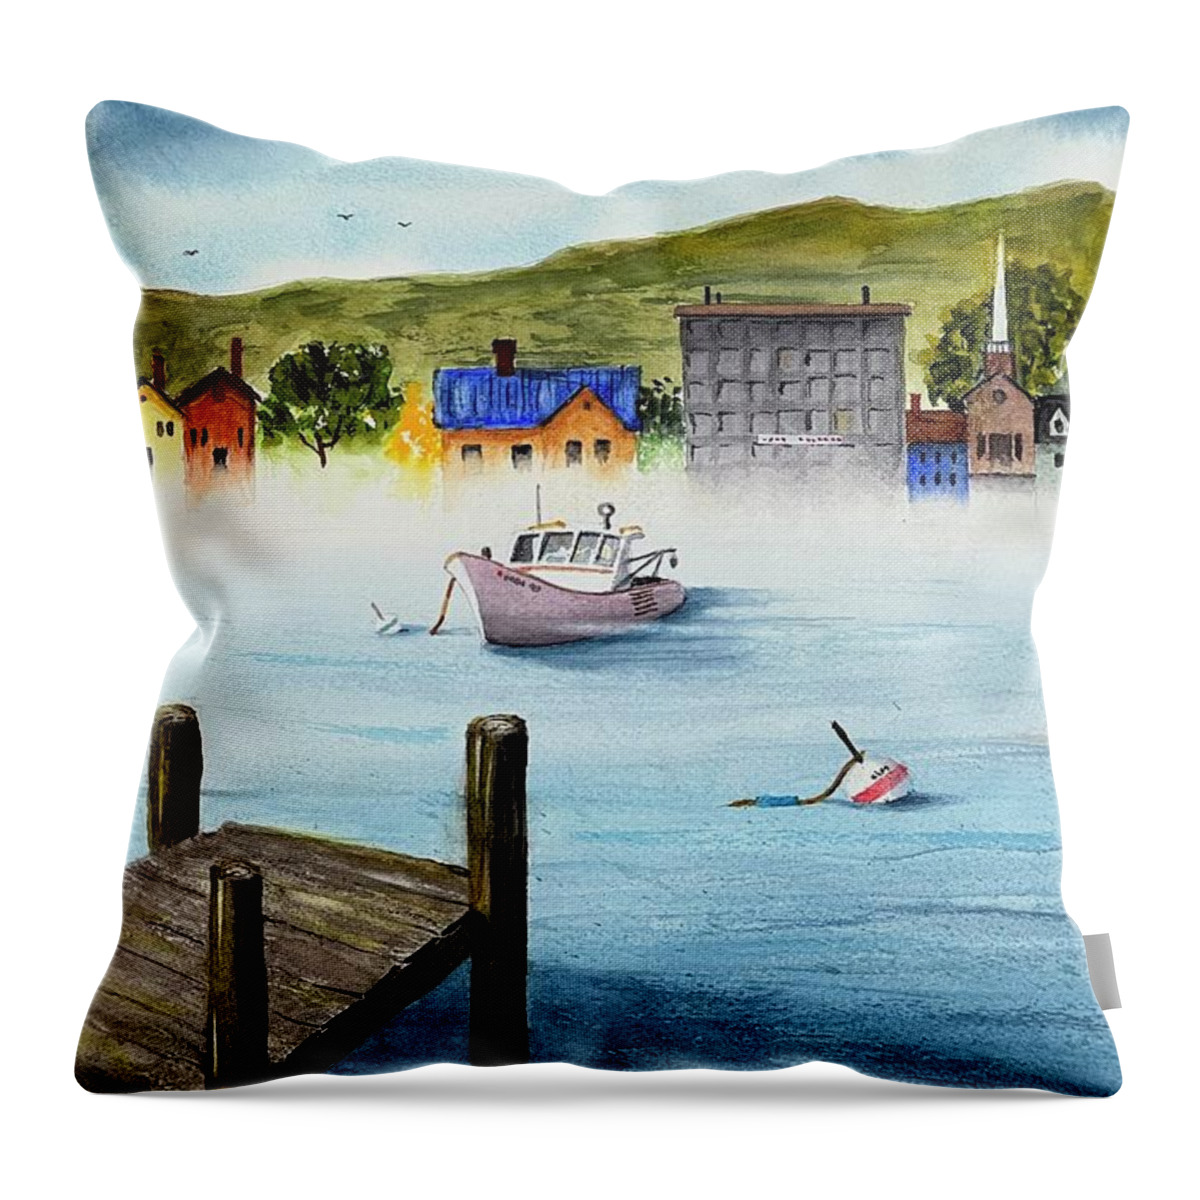  Throw Pillow featuring the painting Misty Morning by Joseph Burger